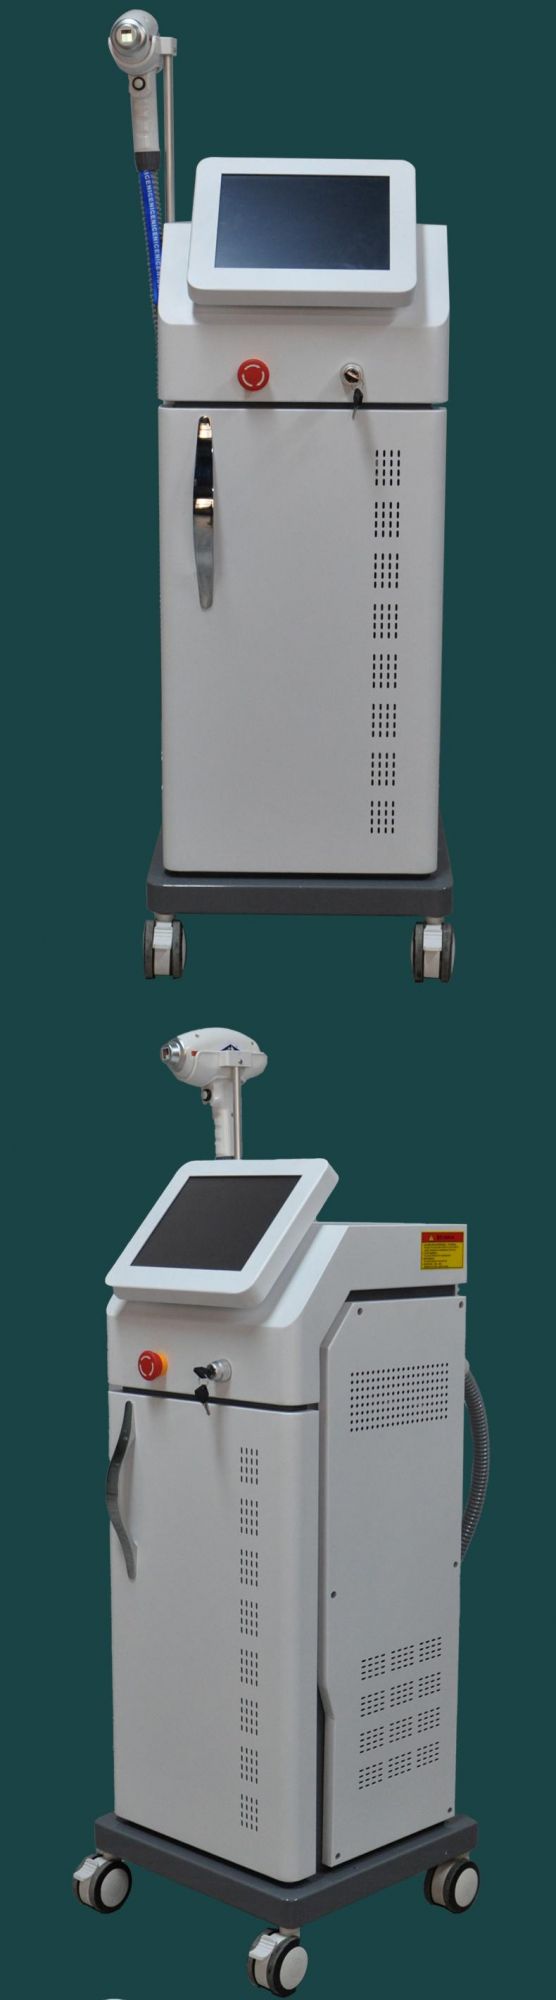 Professional Laser Hair Removal 3 Wave Diode Laser 755 808 1064 Laser Hair Removal Machines Price